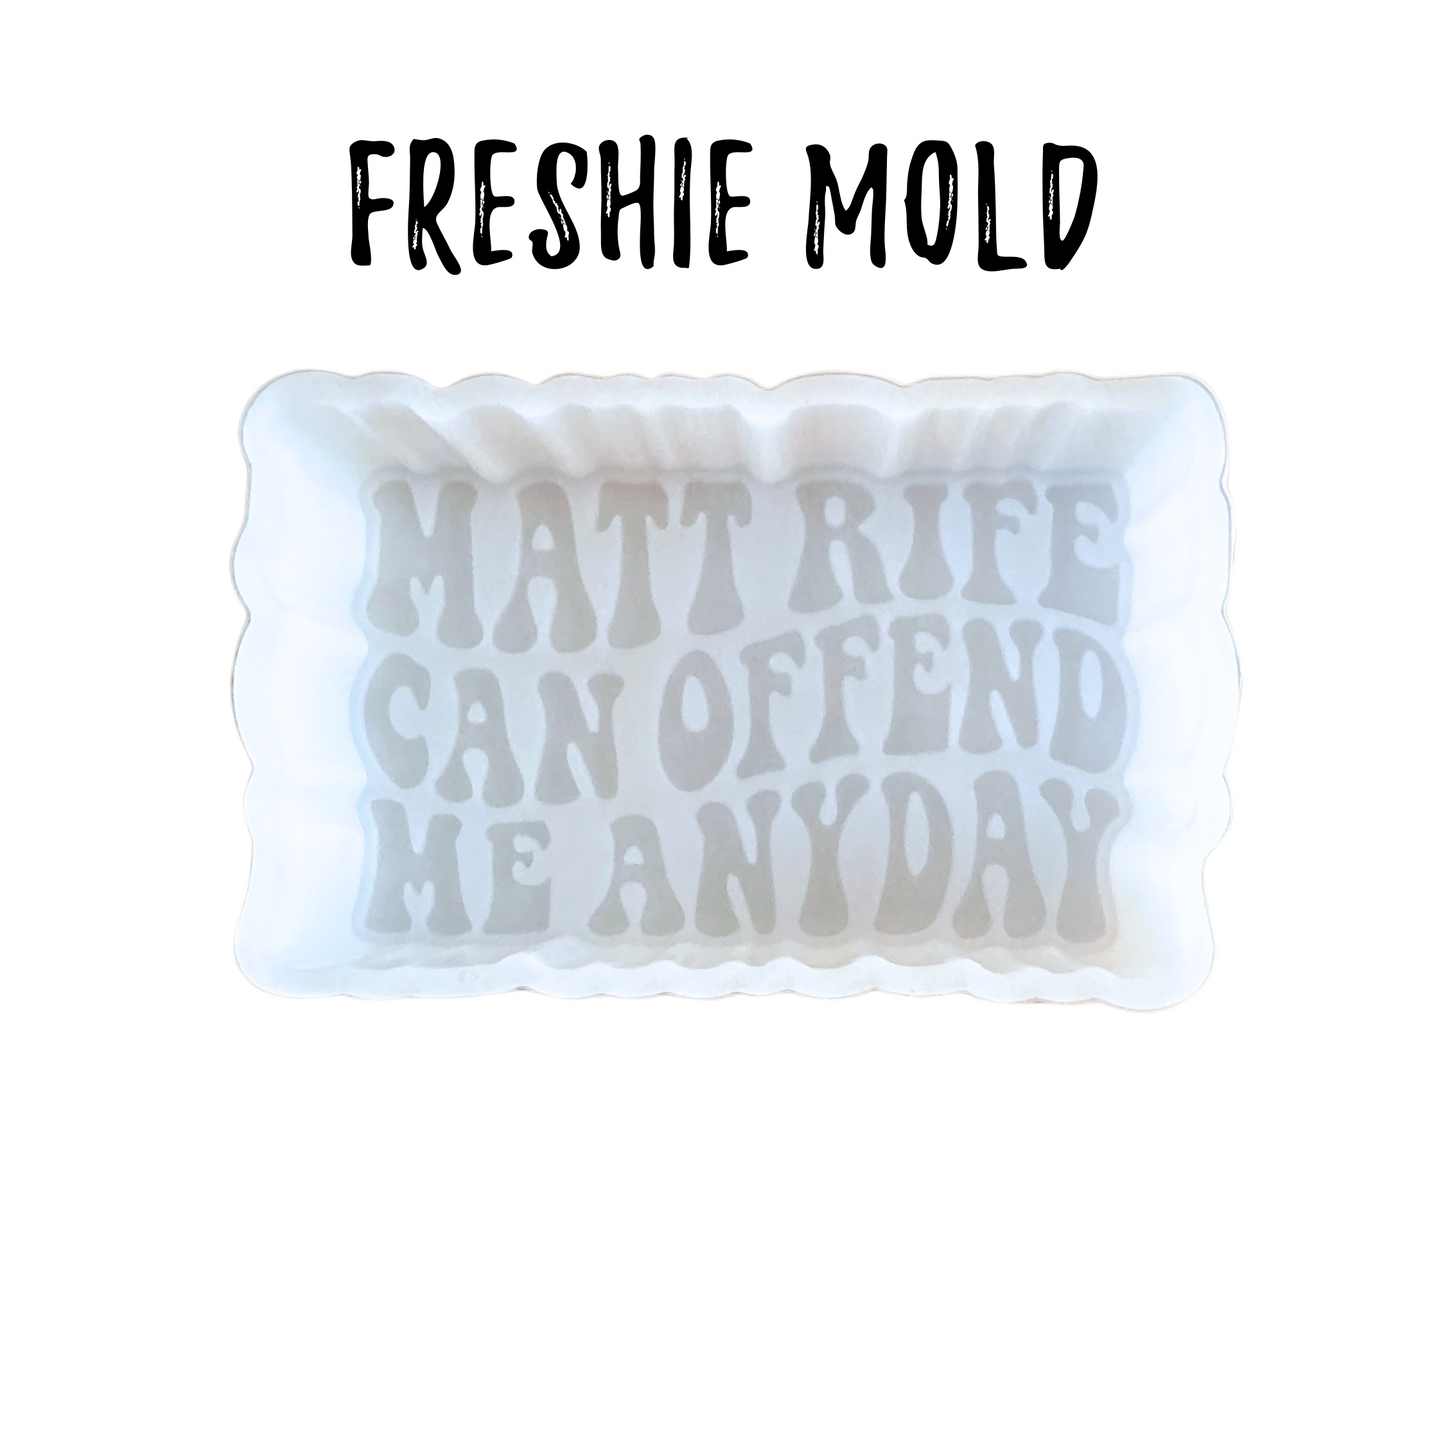 Matt Can Offend Me Anyday Freshie Silicone Mold 2.5 x 4 x 0.8”